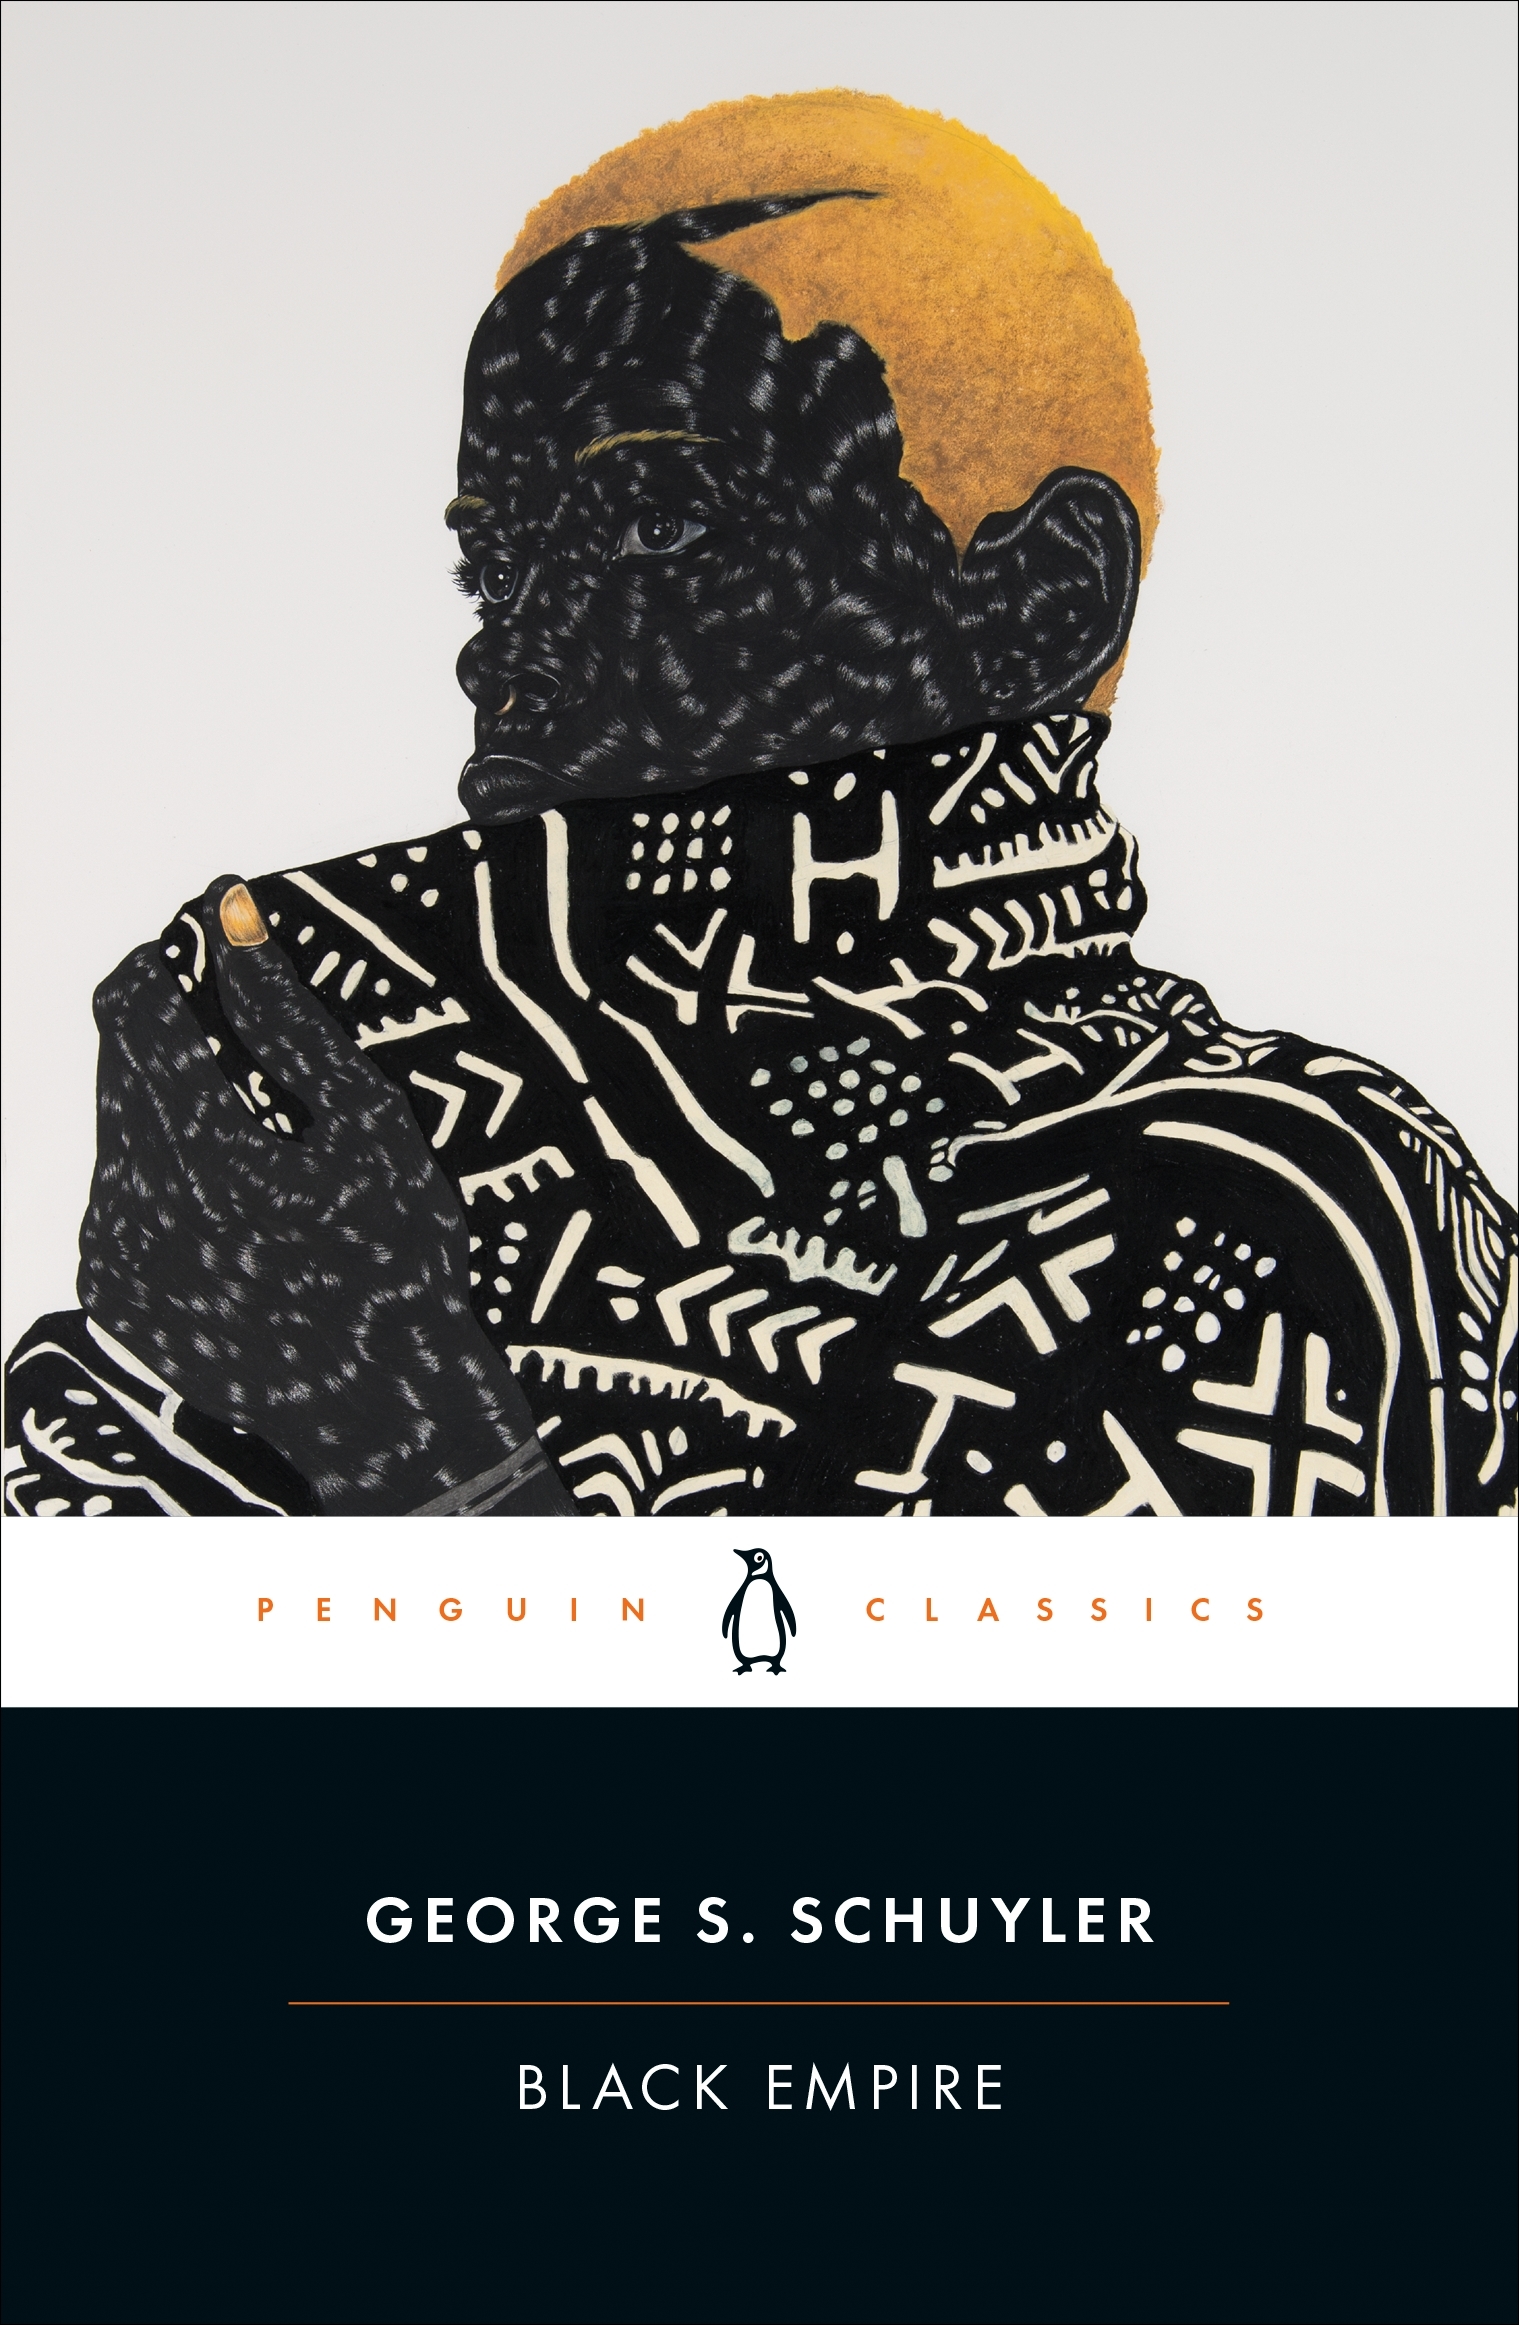 Cover of 'Black Empire' by George S. Schuyler.